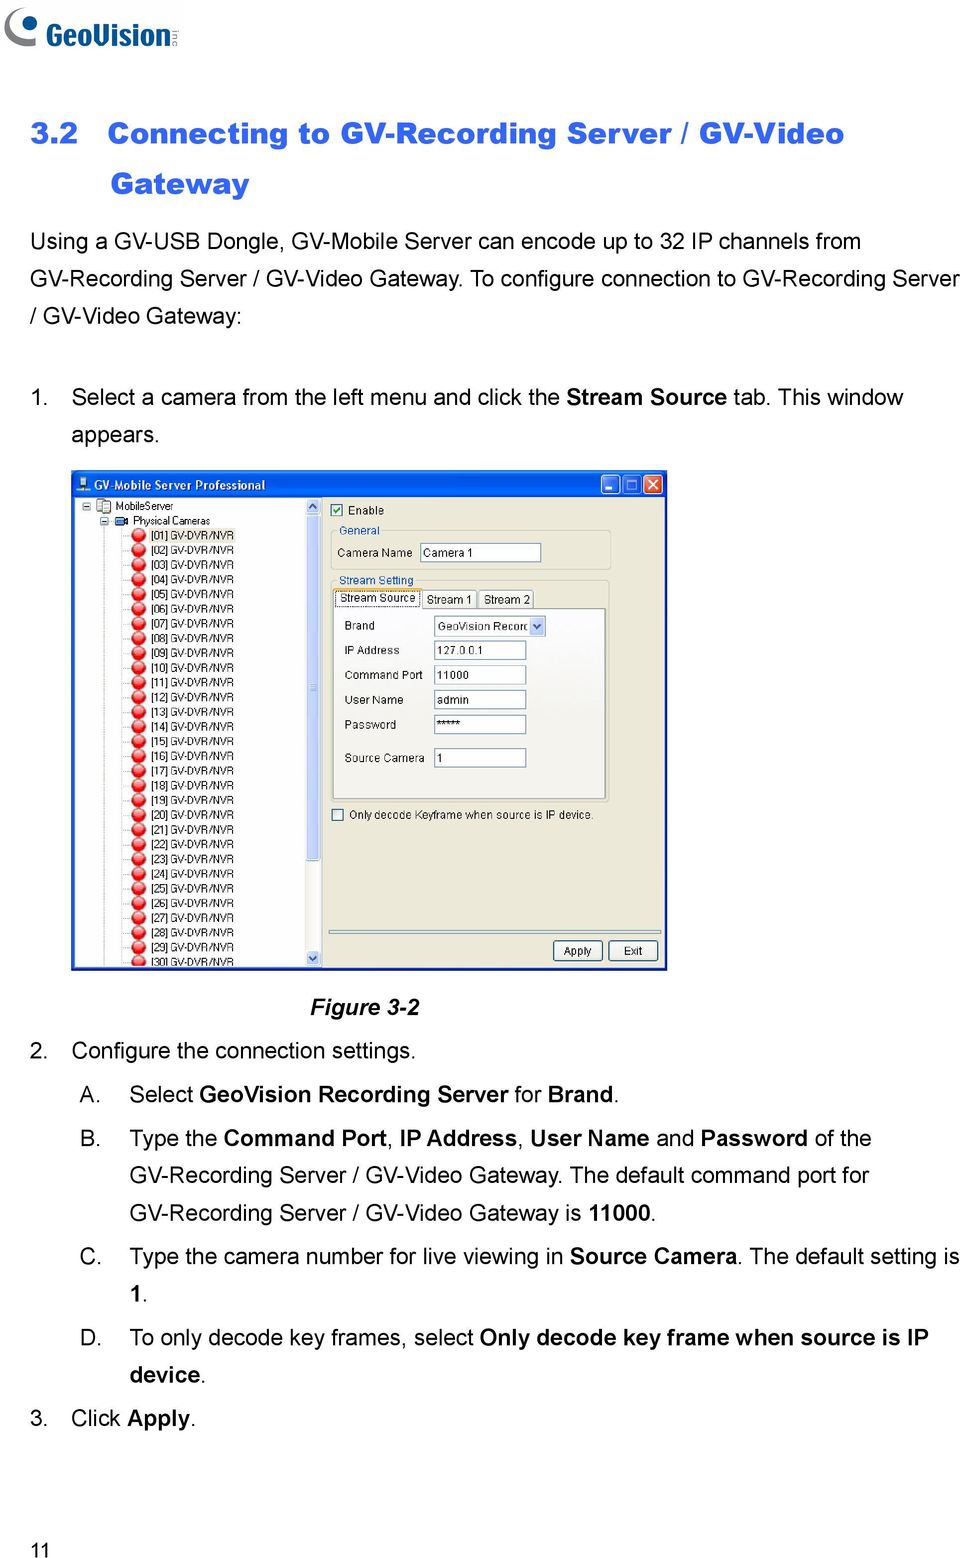 Configure the connection settings. A. Select GeoVision Recording Server for Brand. B. Type the Command Port, IP Address, User Name and Password of the GV-Recording Server / GV-Video Gateway.